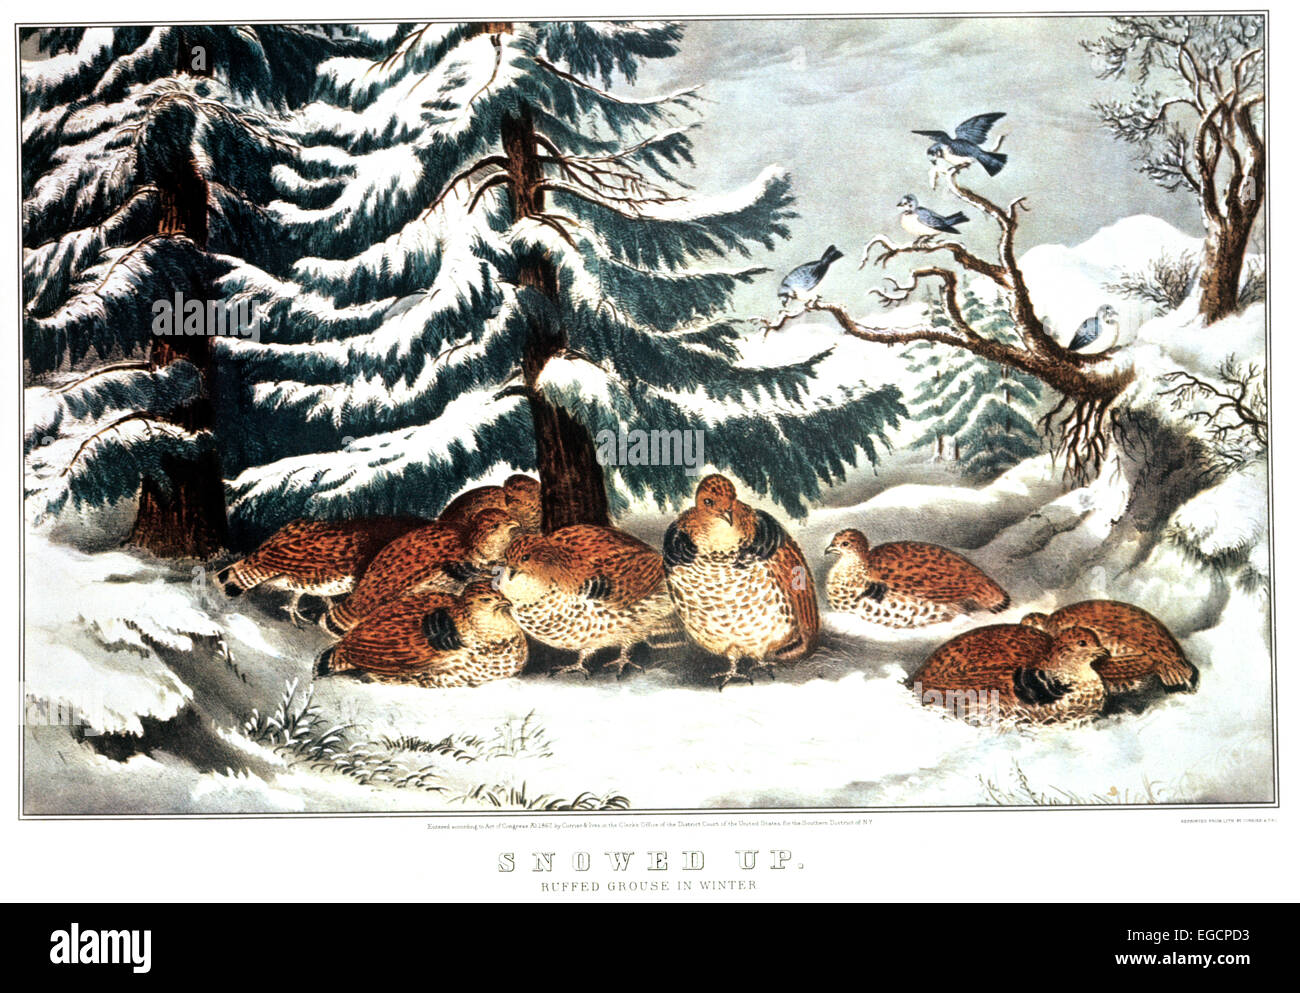 CURRIER AND IVES LITHOGRAPH 1867 SNOWED UP RUFFED GROUSE IN WINTER GAME BIRD HUNTING Stock Photo